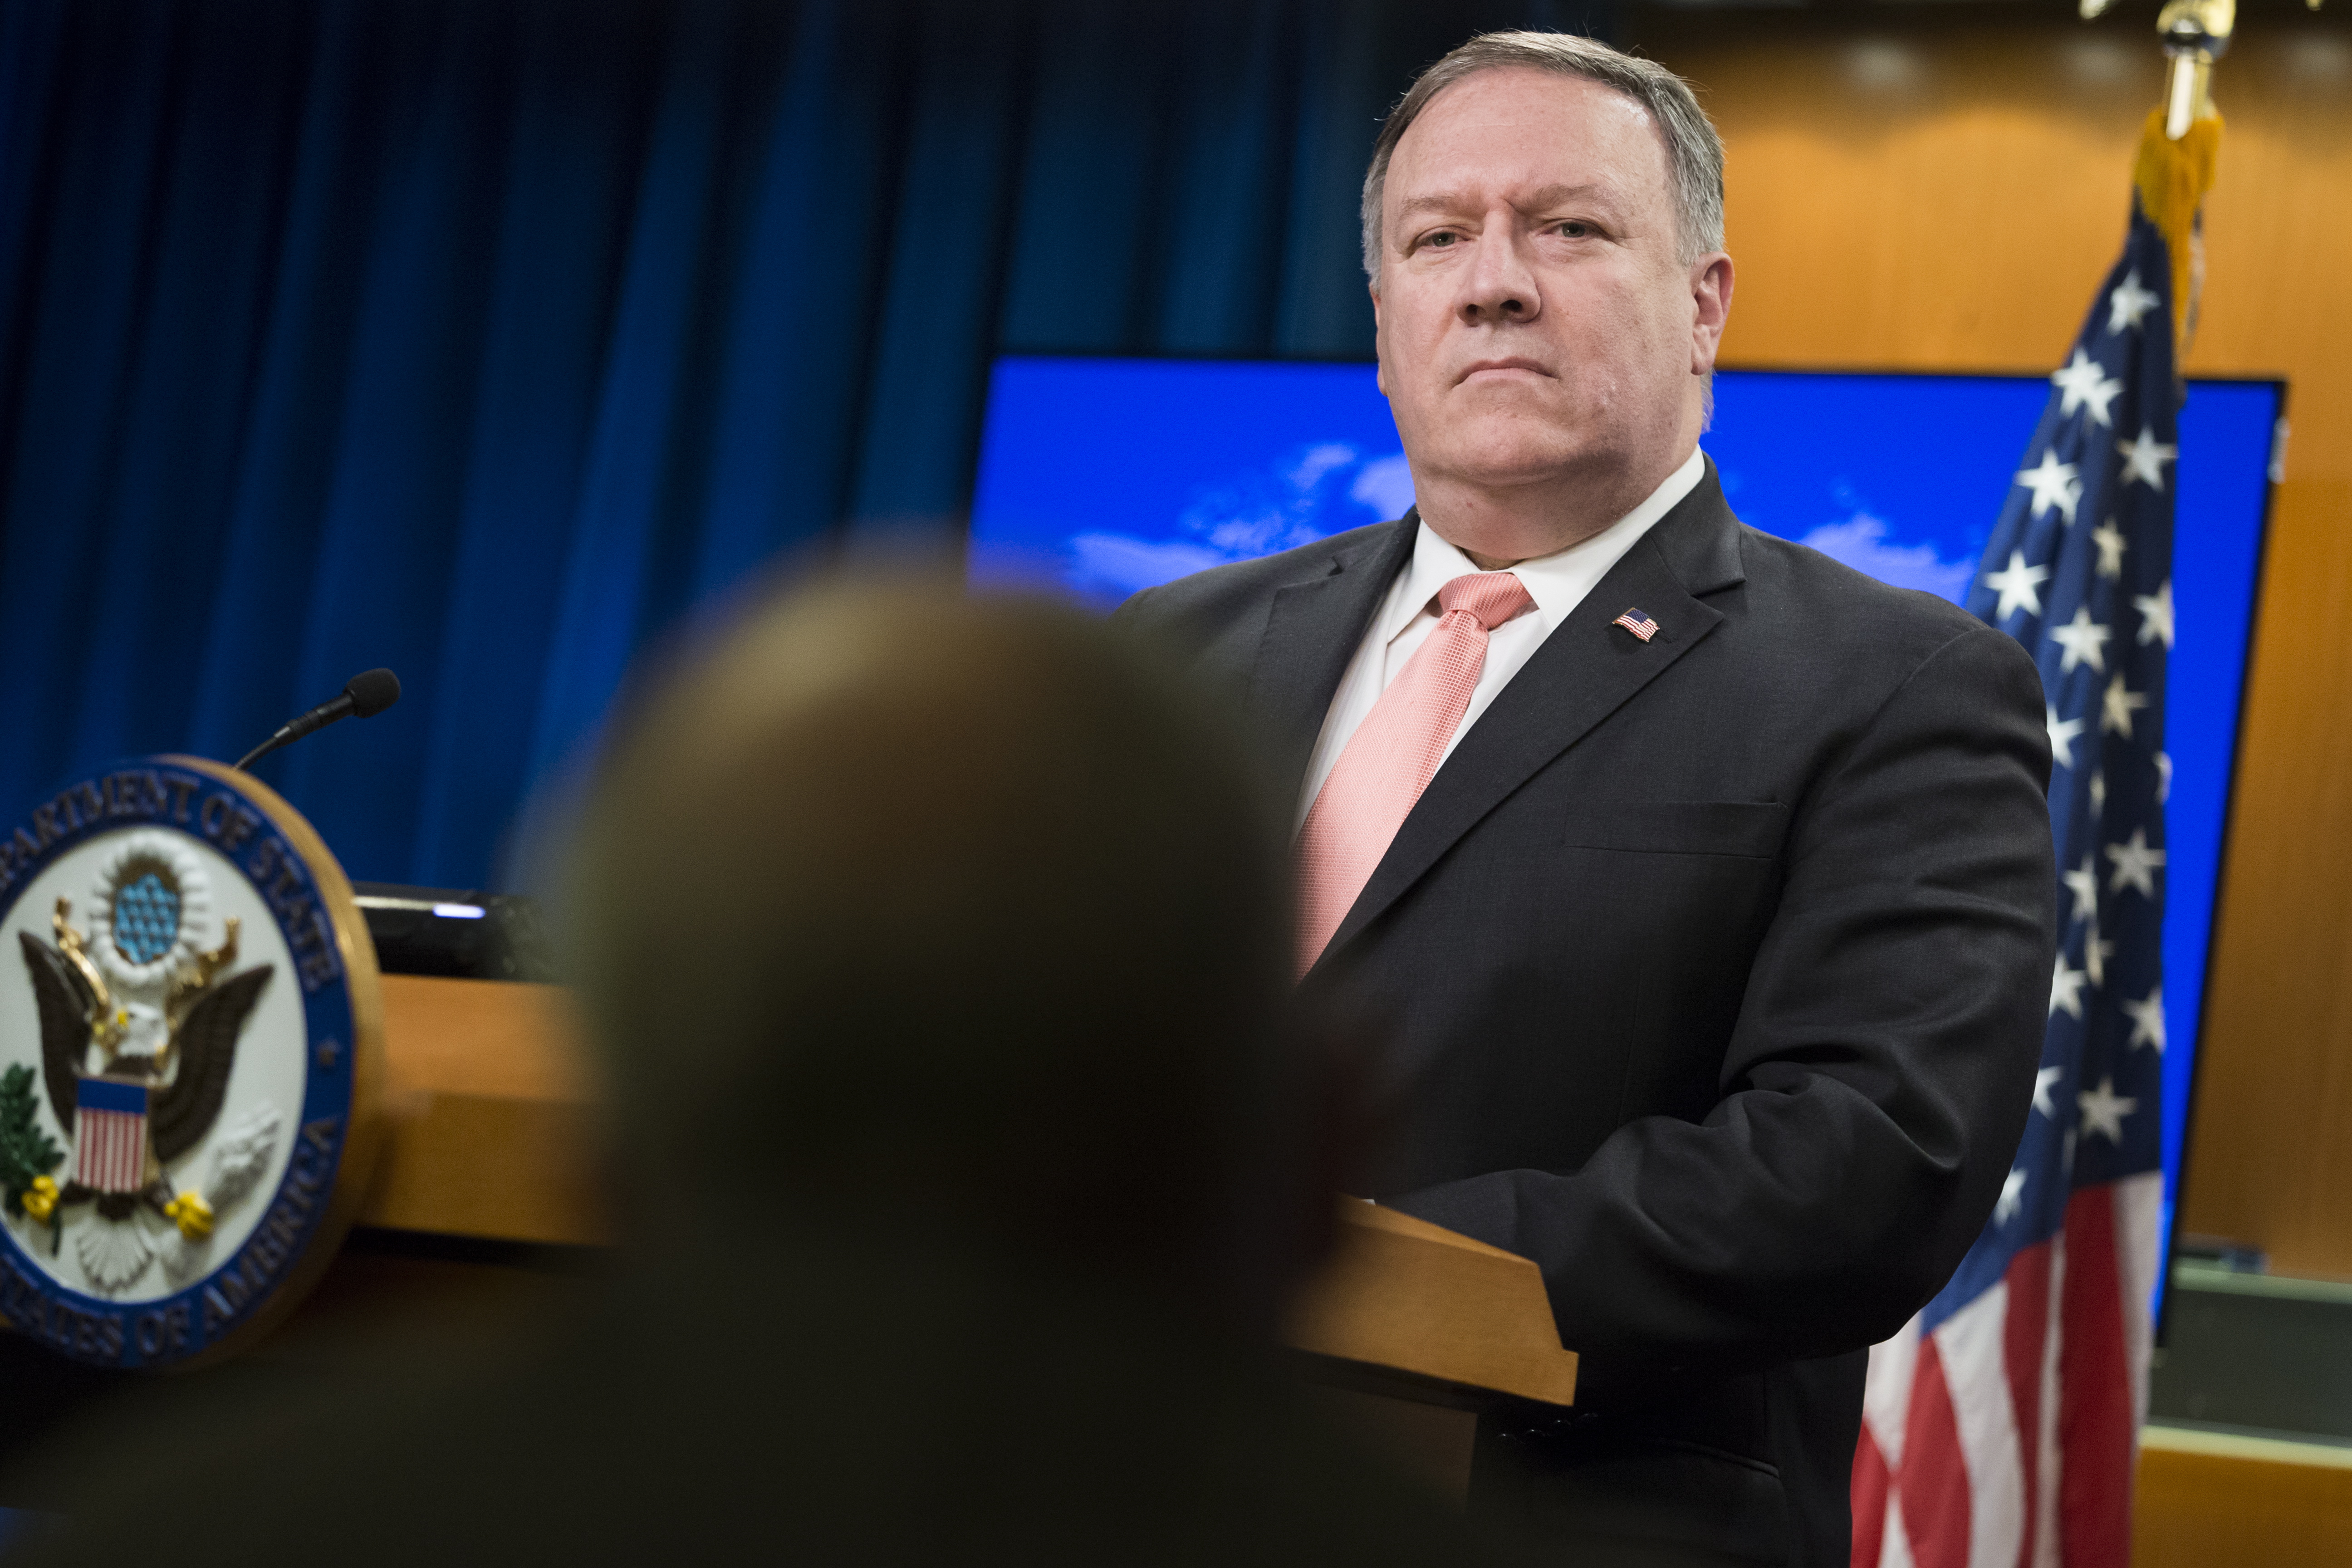 epa07114858 US Secretary of State Mike Pompeo holds a news conference at the State Department in Washington, DC, USA, 23 October 2018. Pompeo faced questions on the Trump administration's response to Saudi Arabia following the murder of journalist Jamal Khashoggi. Turkish President Recep Tayyip Erdogan said, 23 October, that it was a 'savage murder' inside the Saudi consulate in Istanbul and that it was a premediated, political operation.  EPA/MICHAEL REYNOLDS